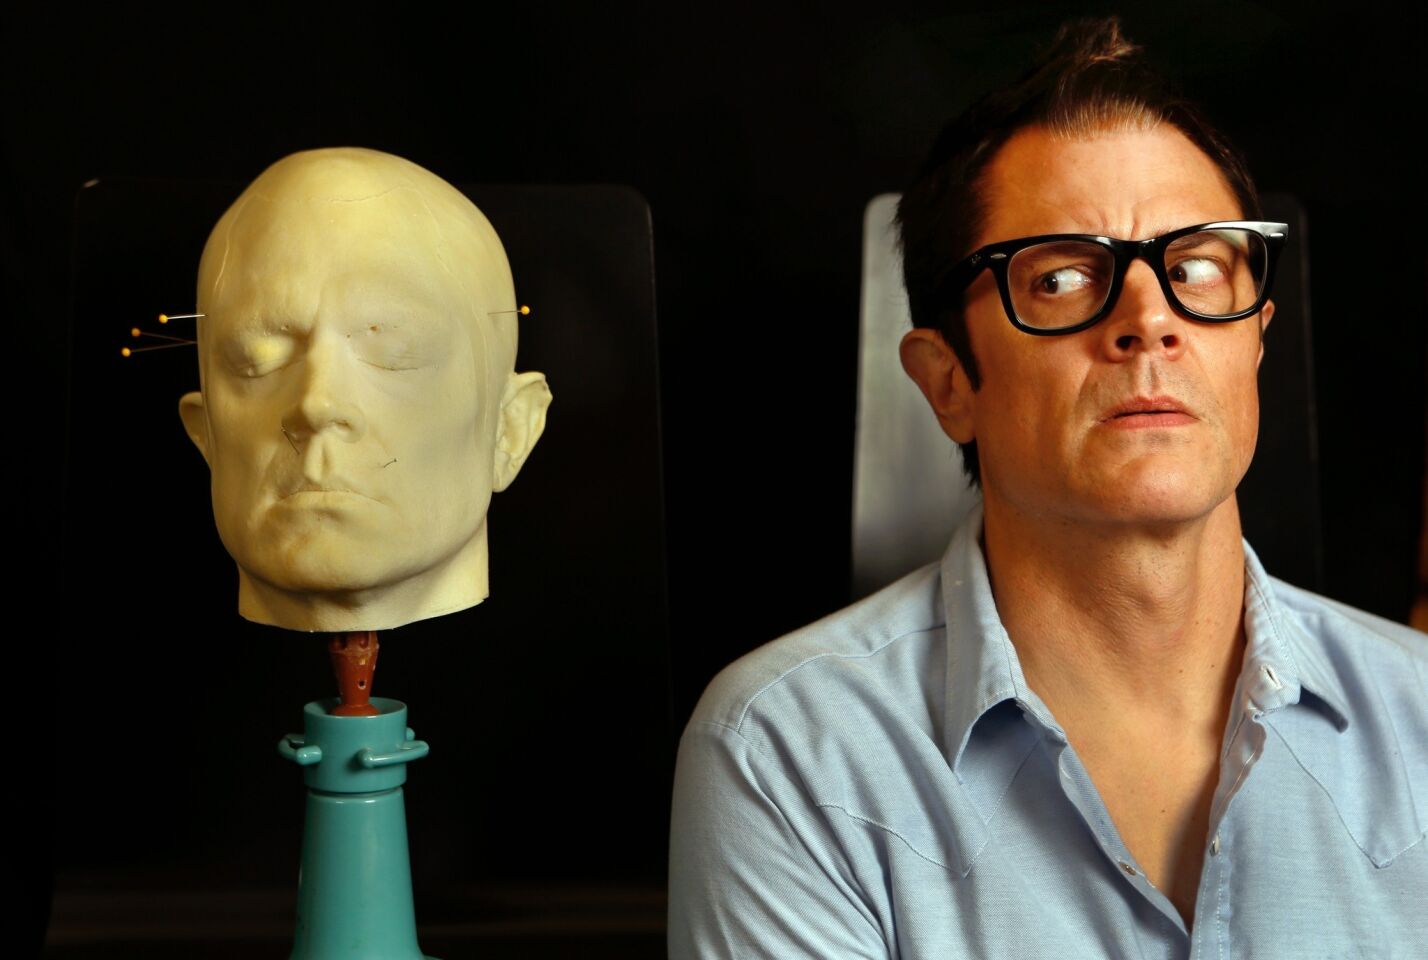 "Jackass" veteran Johnny Knoxville had to spend hours in makeup to turn him into "Bad Grandpa's" Irving Zisman, 86.